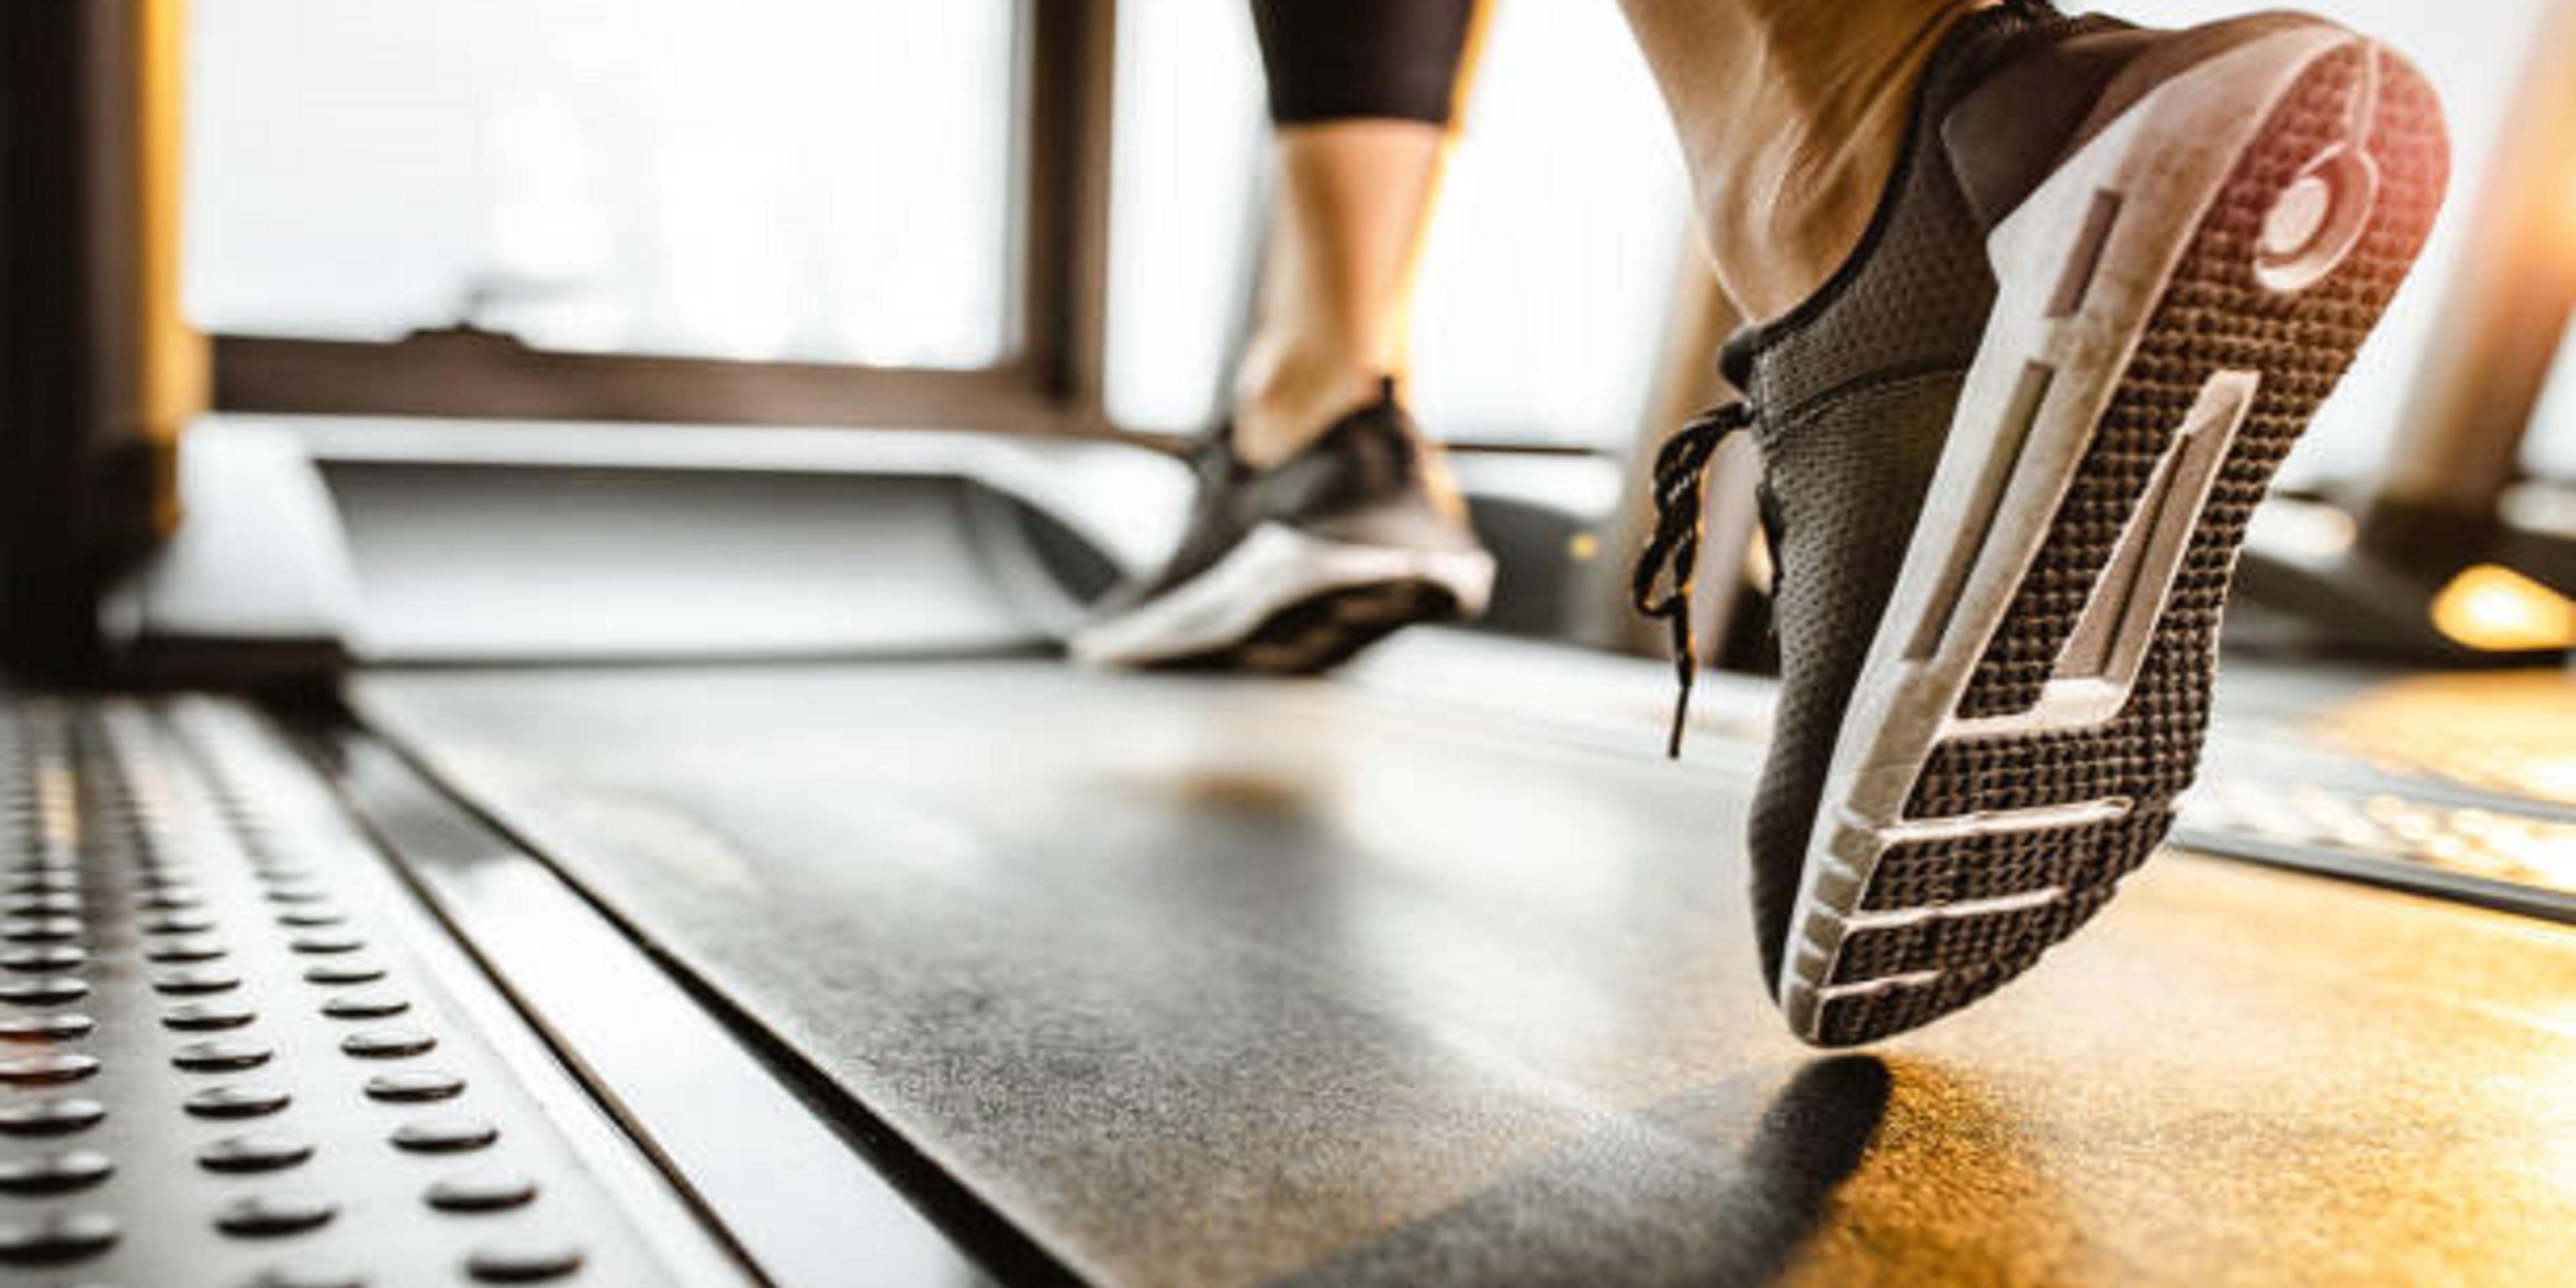 Get your sweat on in our complimentary, fully equipped Fitness Center.